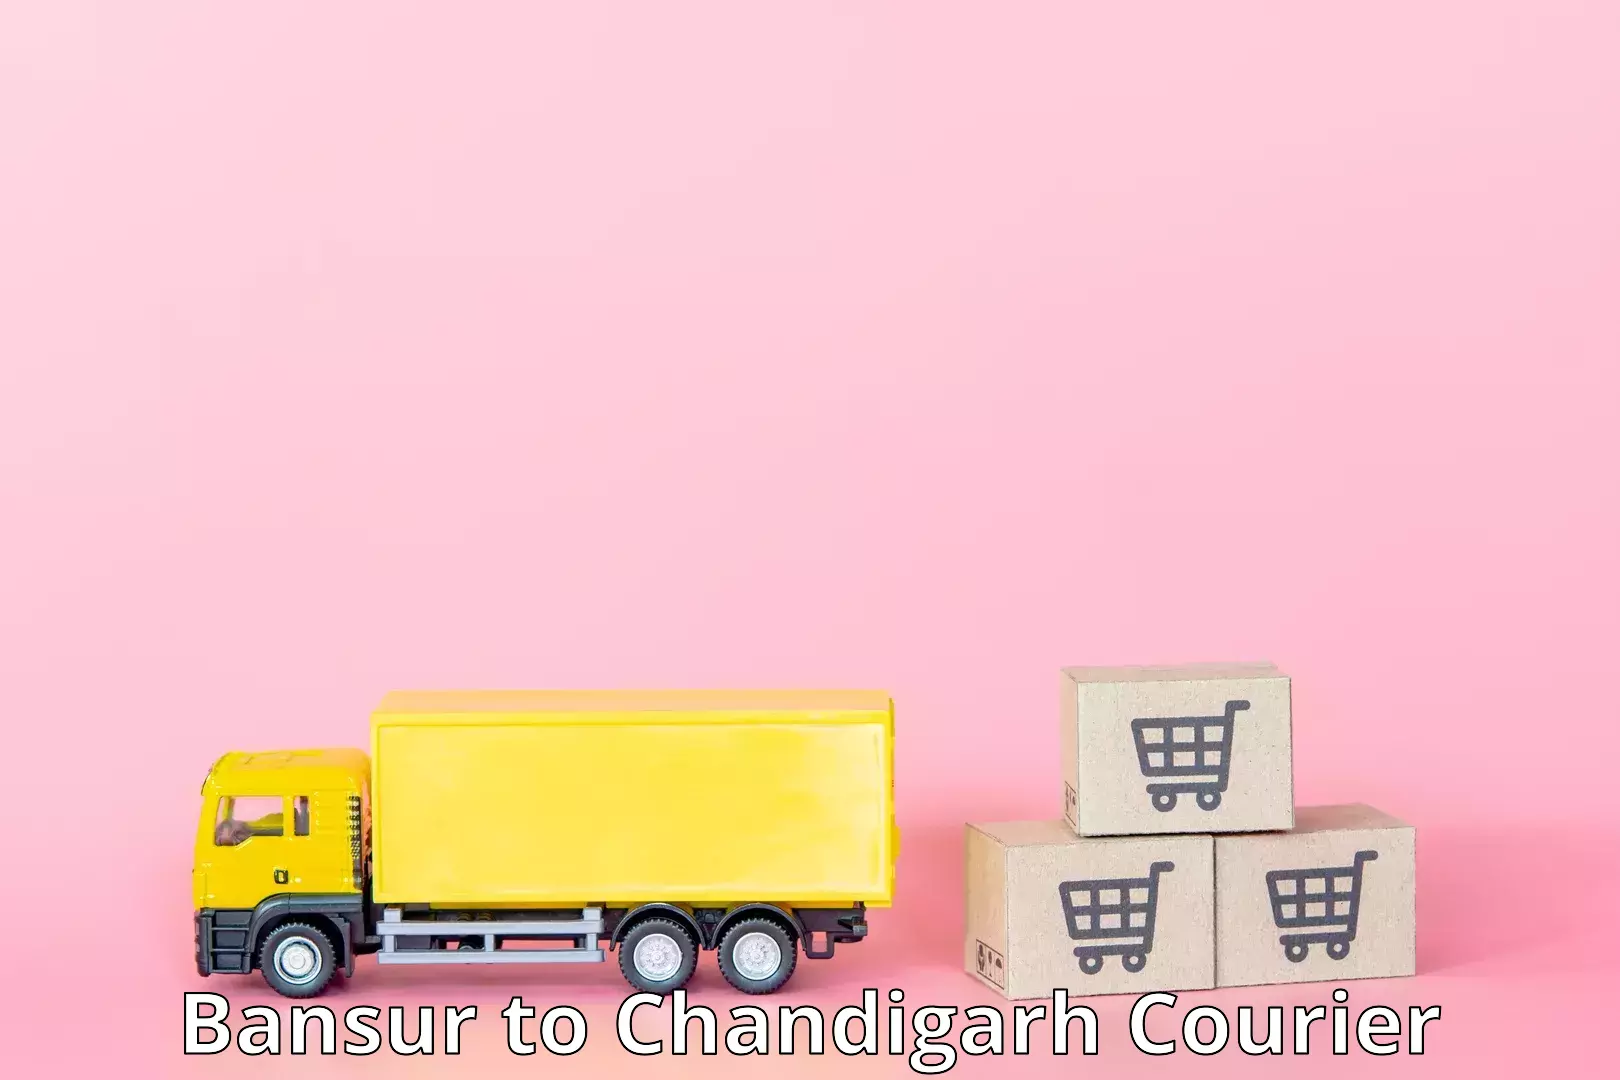 Global freight services Bansur to Chandigarh